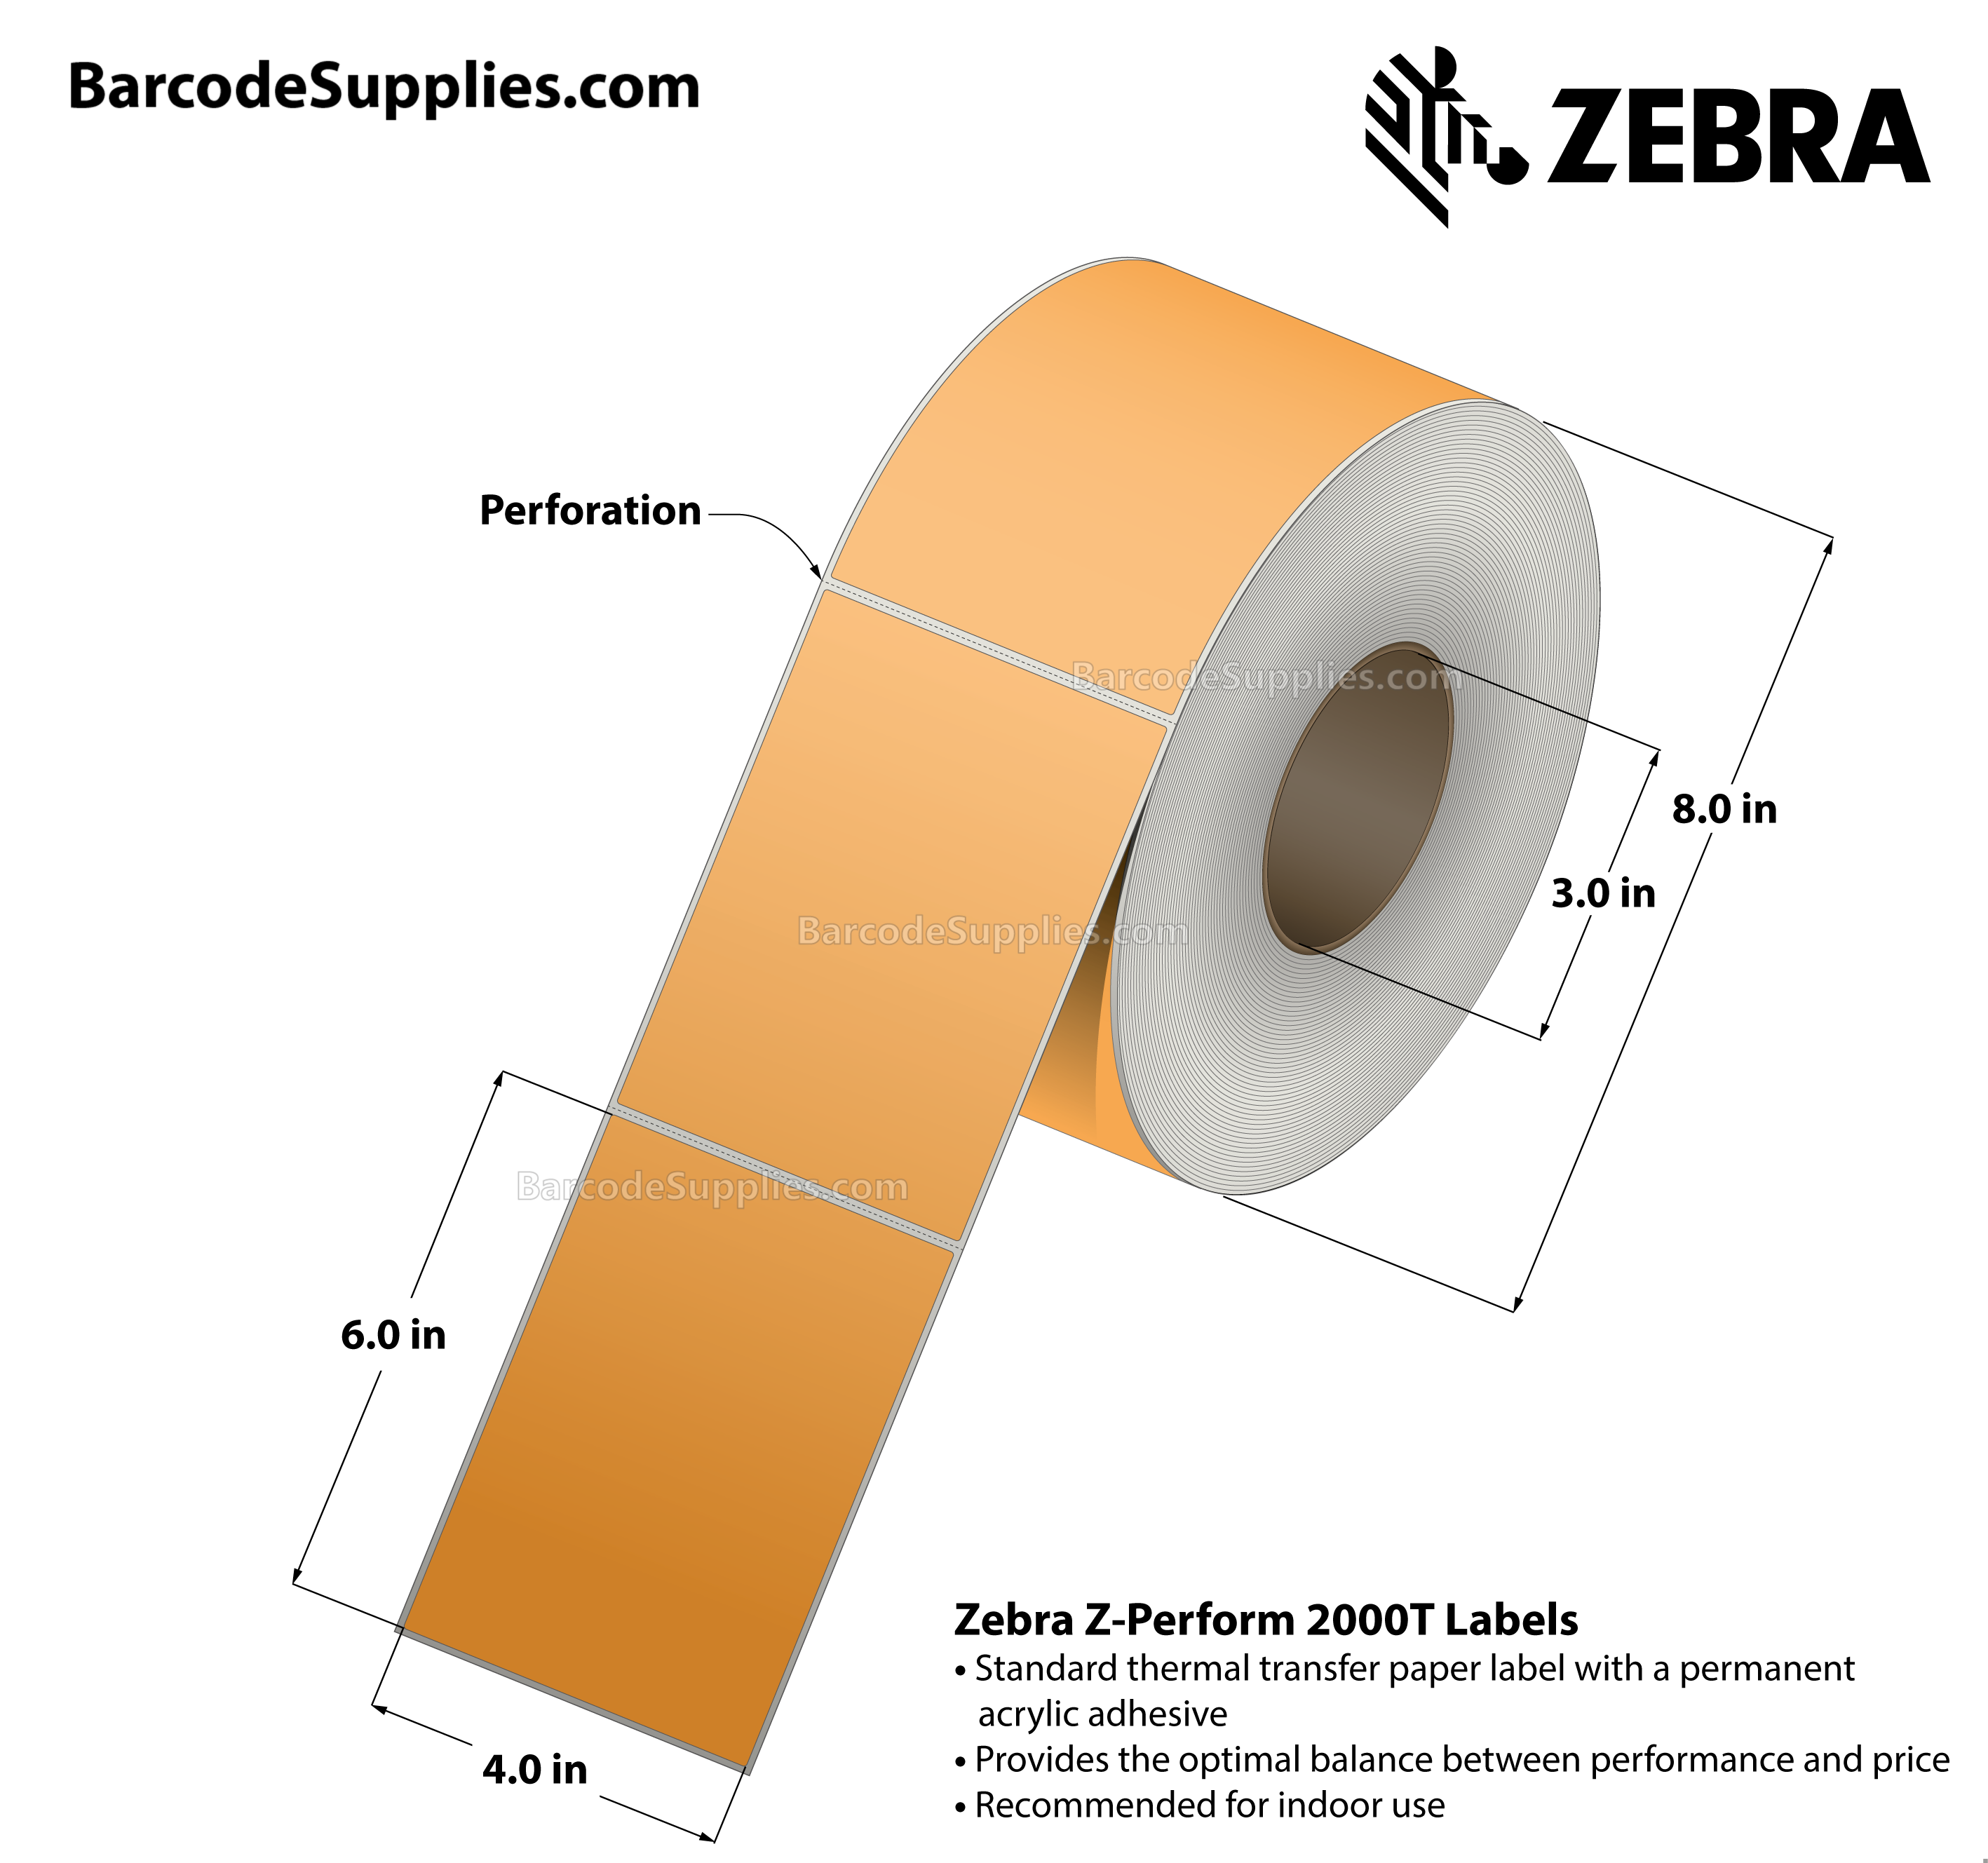 4 x 6 Thermal Transfer Fl. Orange - PMS 804 Z-Perform 2000T Floodcoated (Fl. Orange) Labels With Permanent Adhesive - Perforated - 1000 Labels Per Roll - Carton Of 4 Rolls - 4000 Labels Total - MPN: 10006208-7